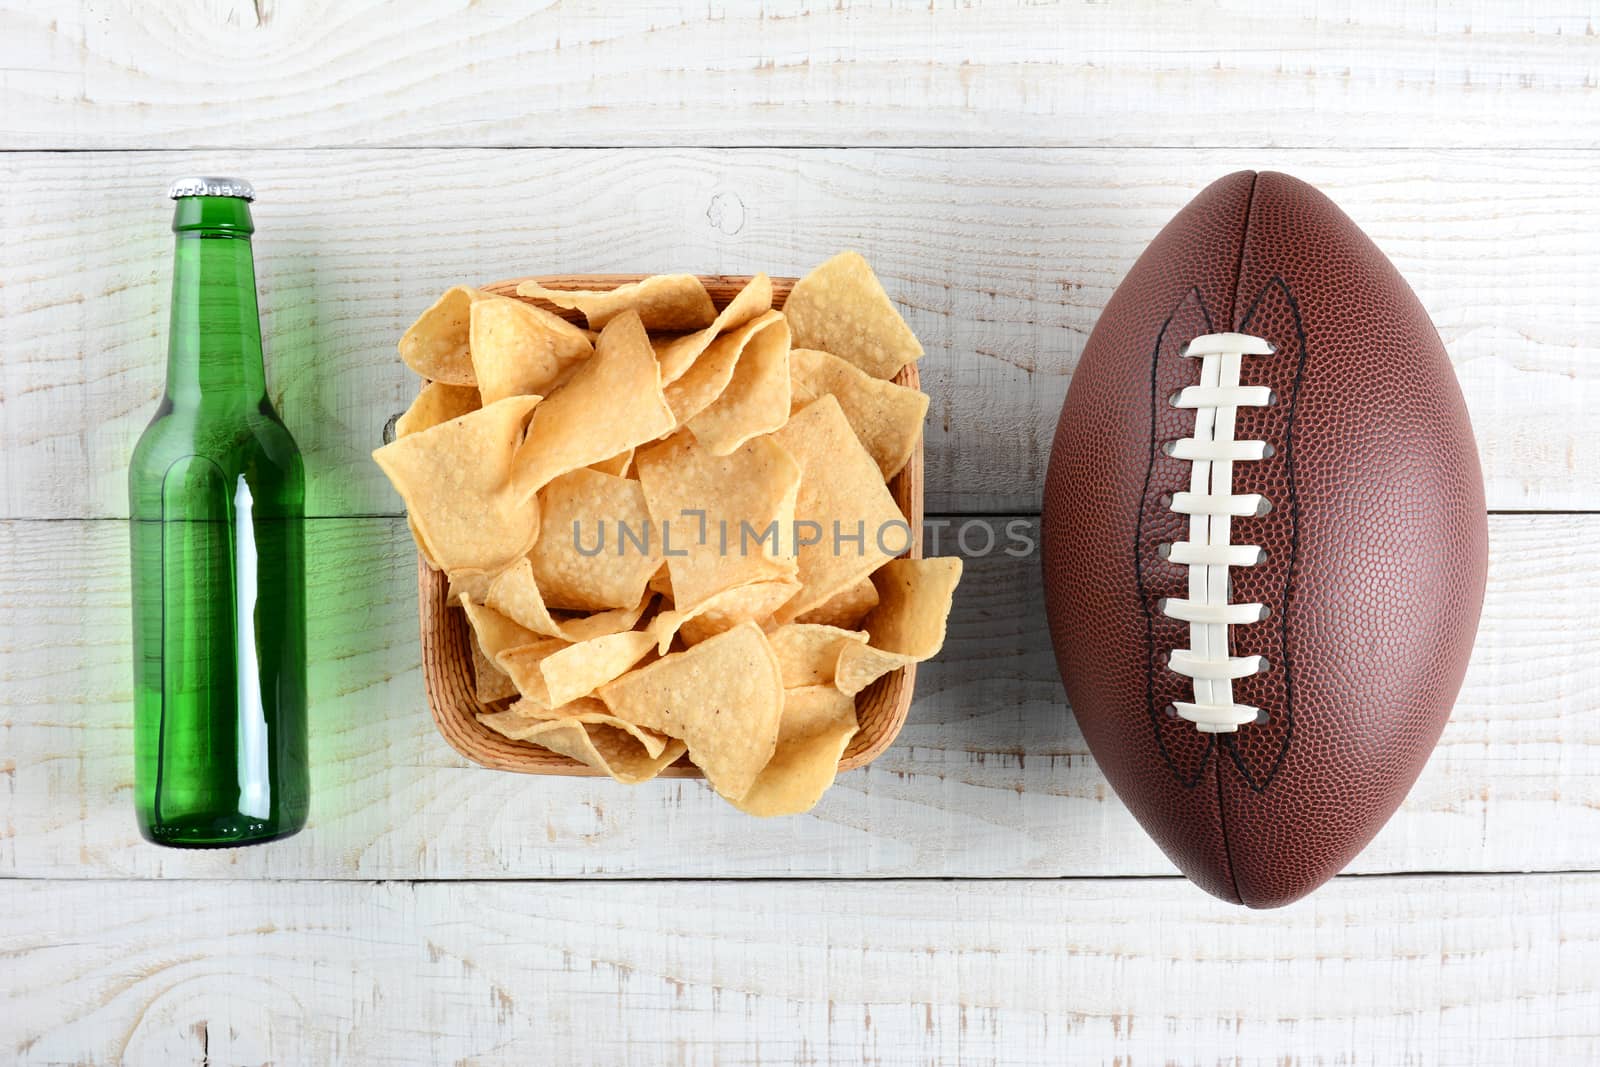 Beer, Chips and Football by sCukrov